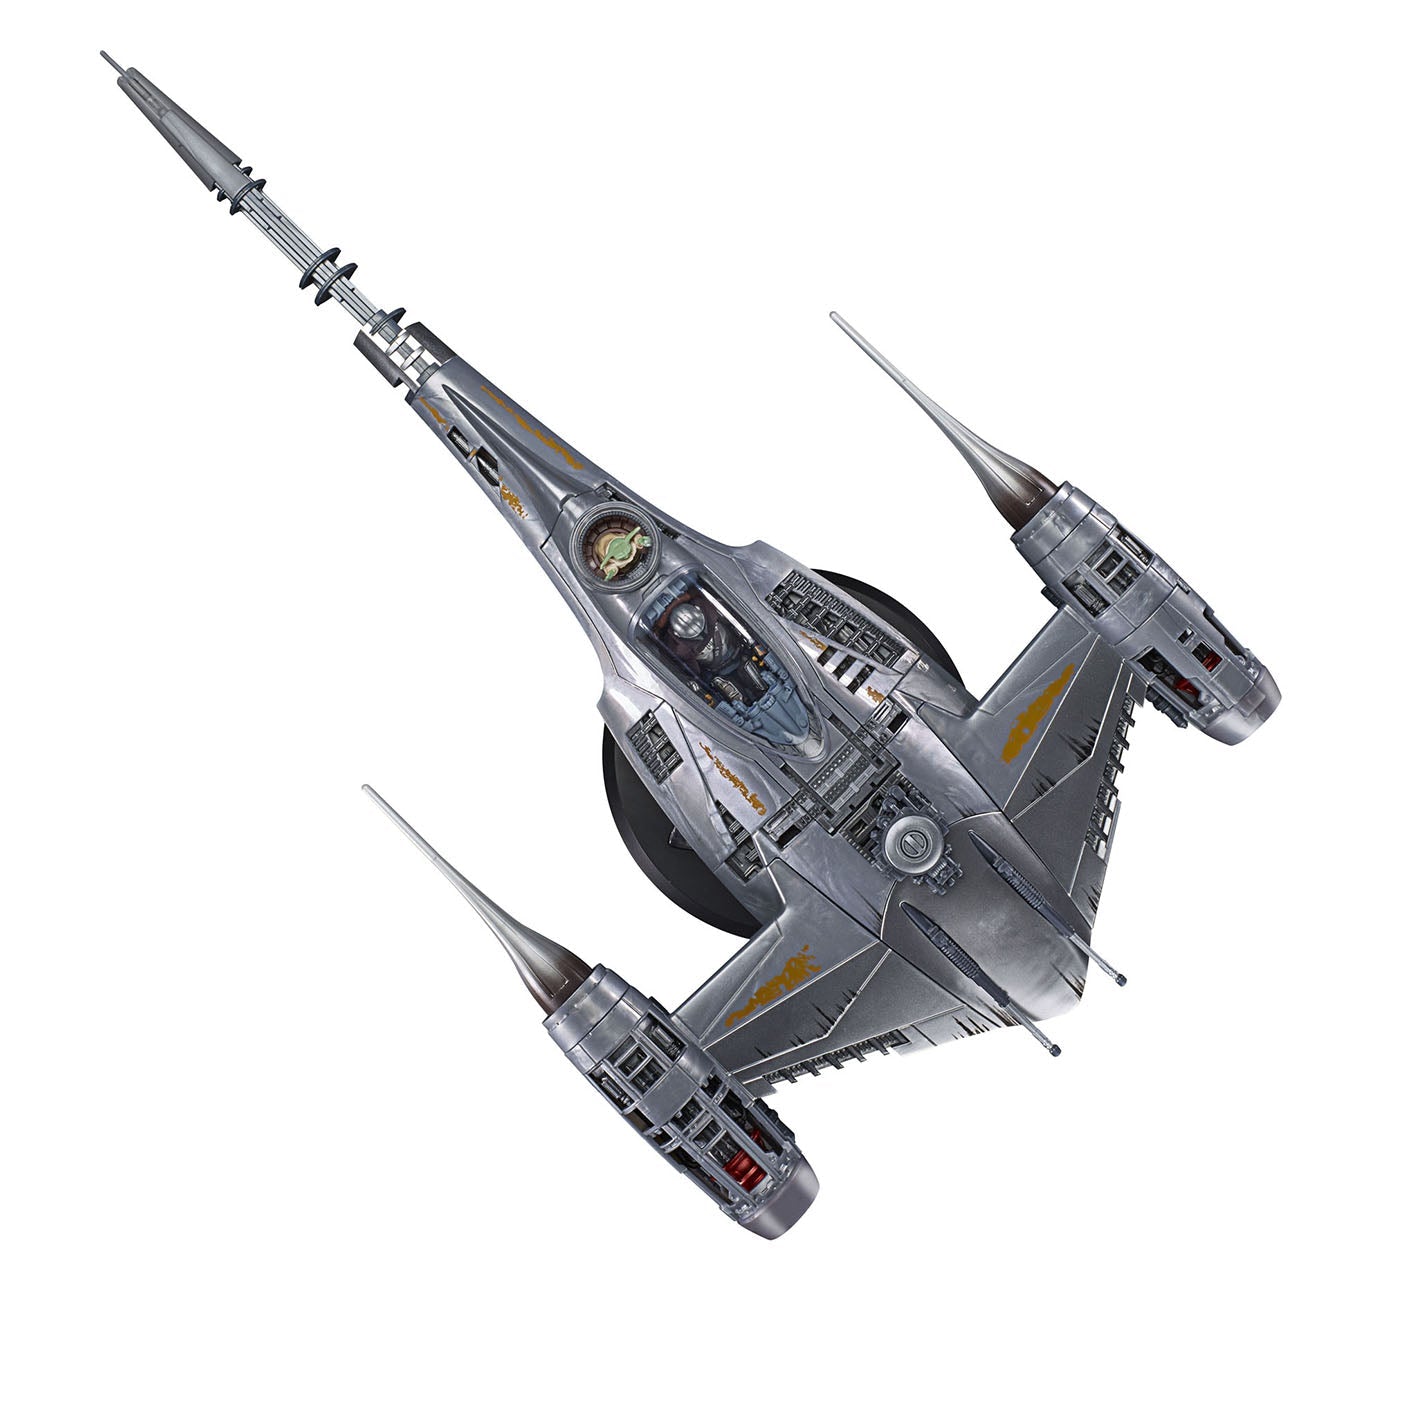 The Mandalorian's N-1 Starfighter, Star Wars: The Vintage Collection